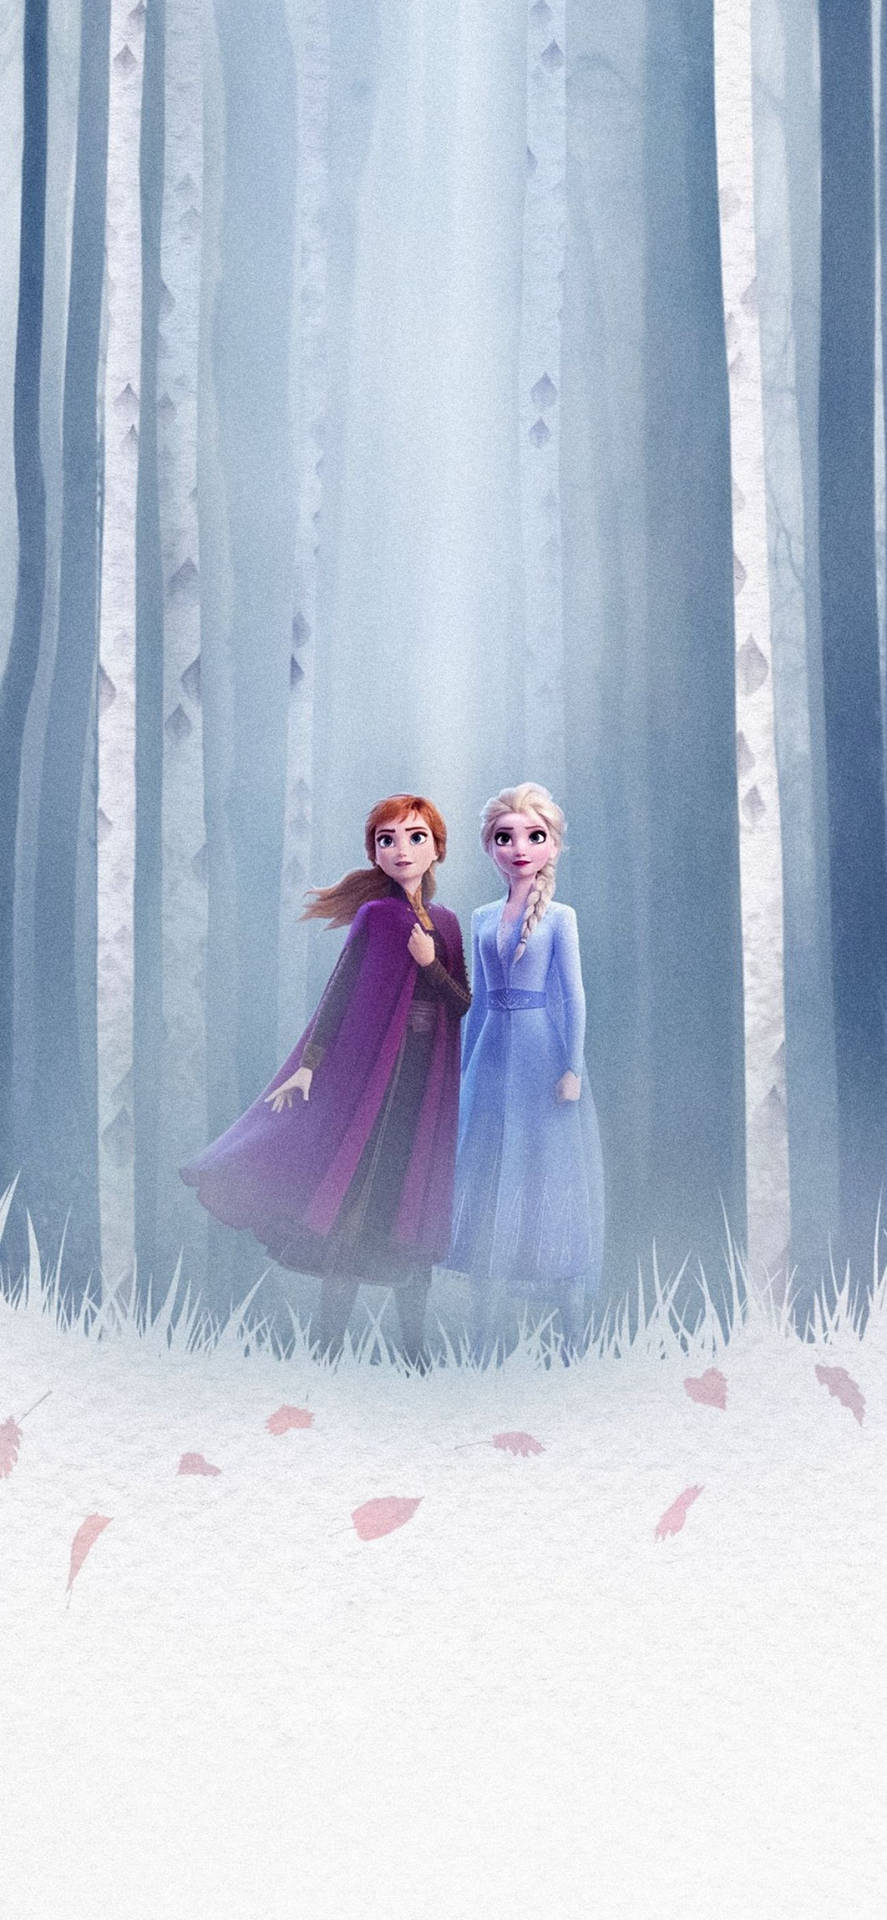 Anna and Elsa on their Journey of Discovery Wallpaper